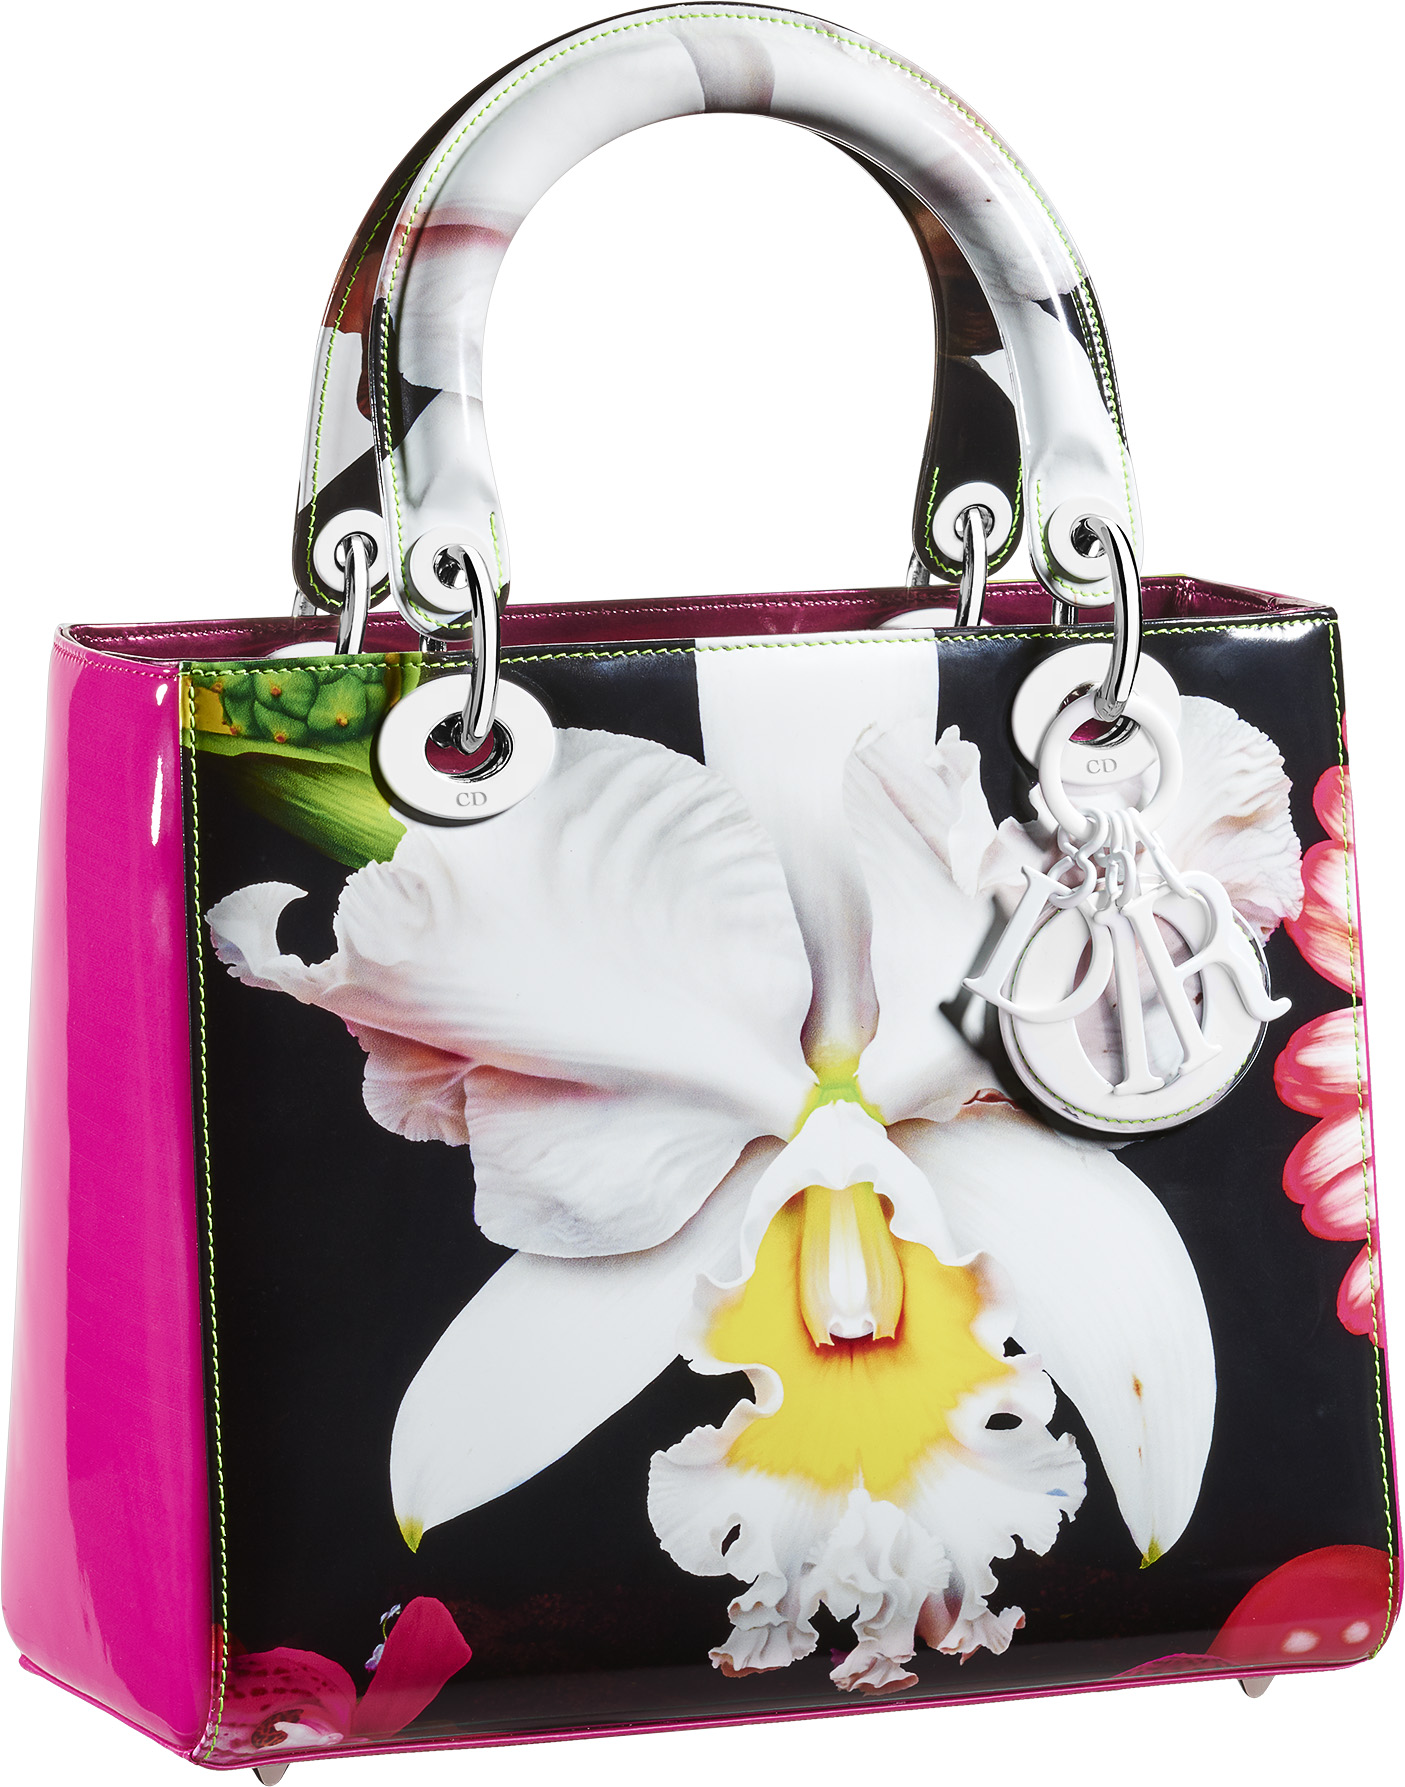 DIOR LIMITED EDITION CREATIONS BY MARC QUINN